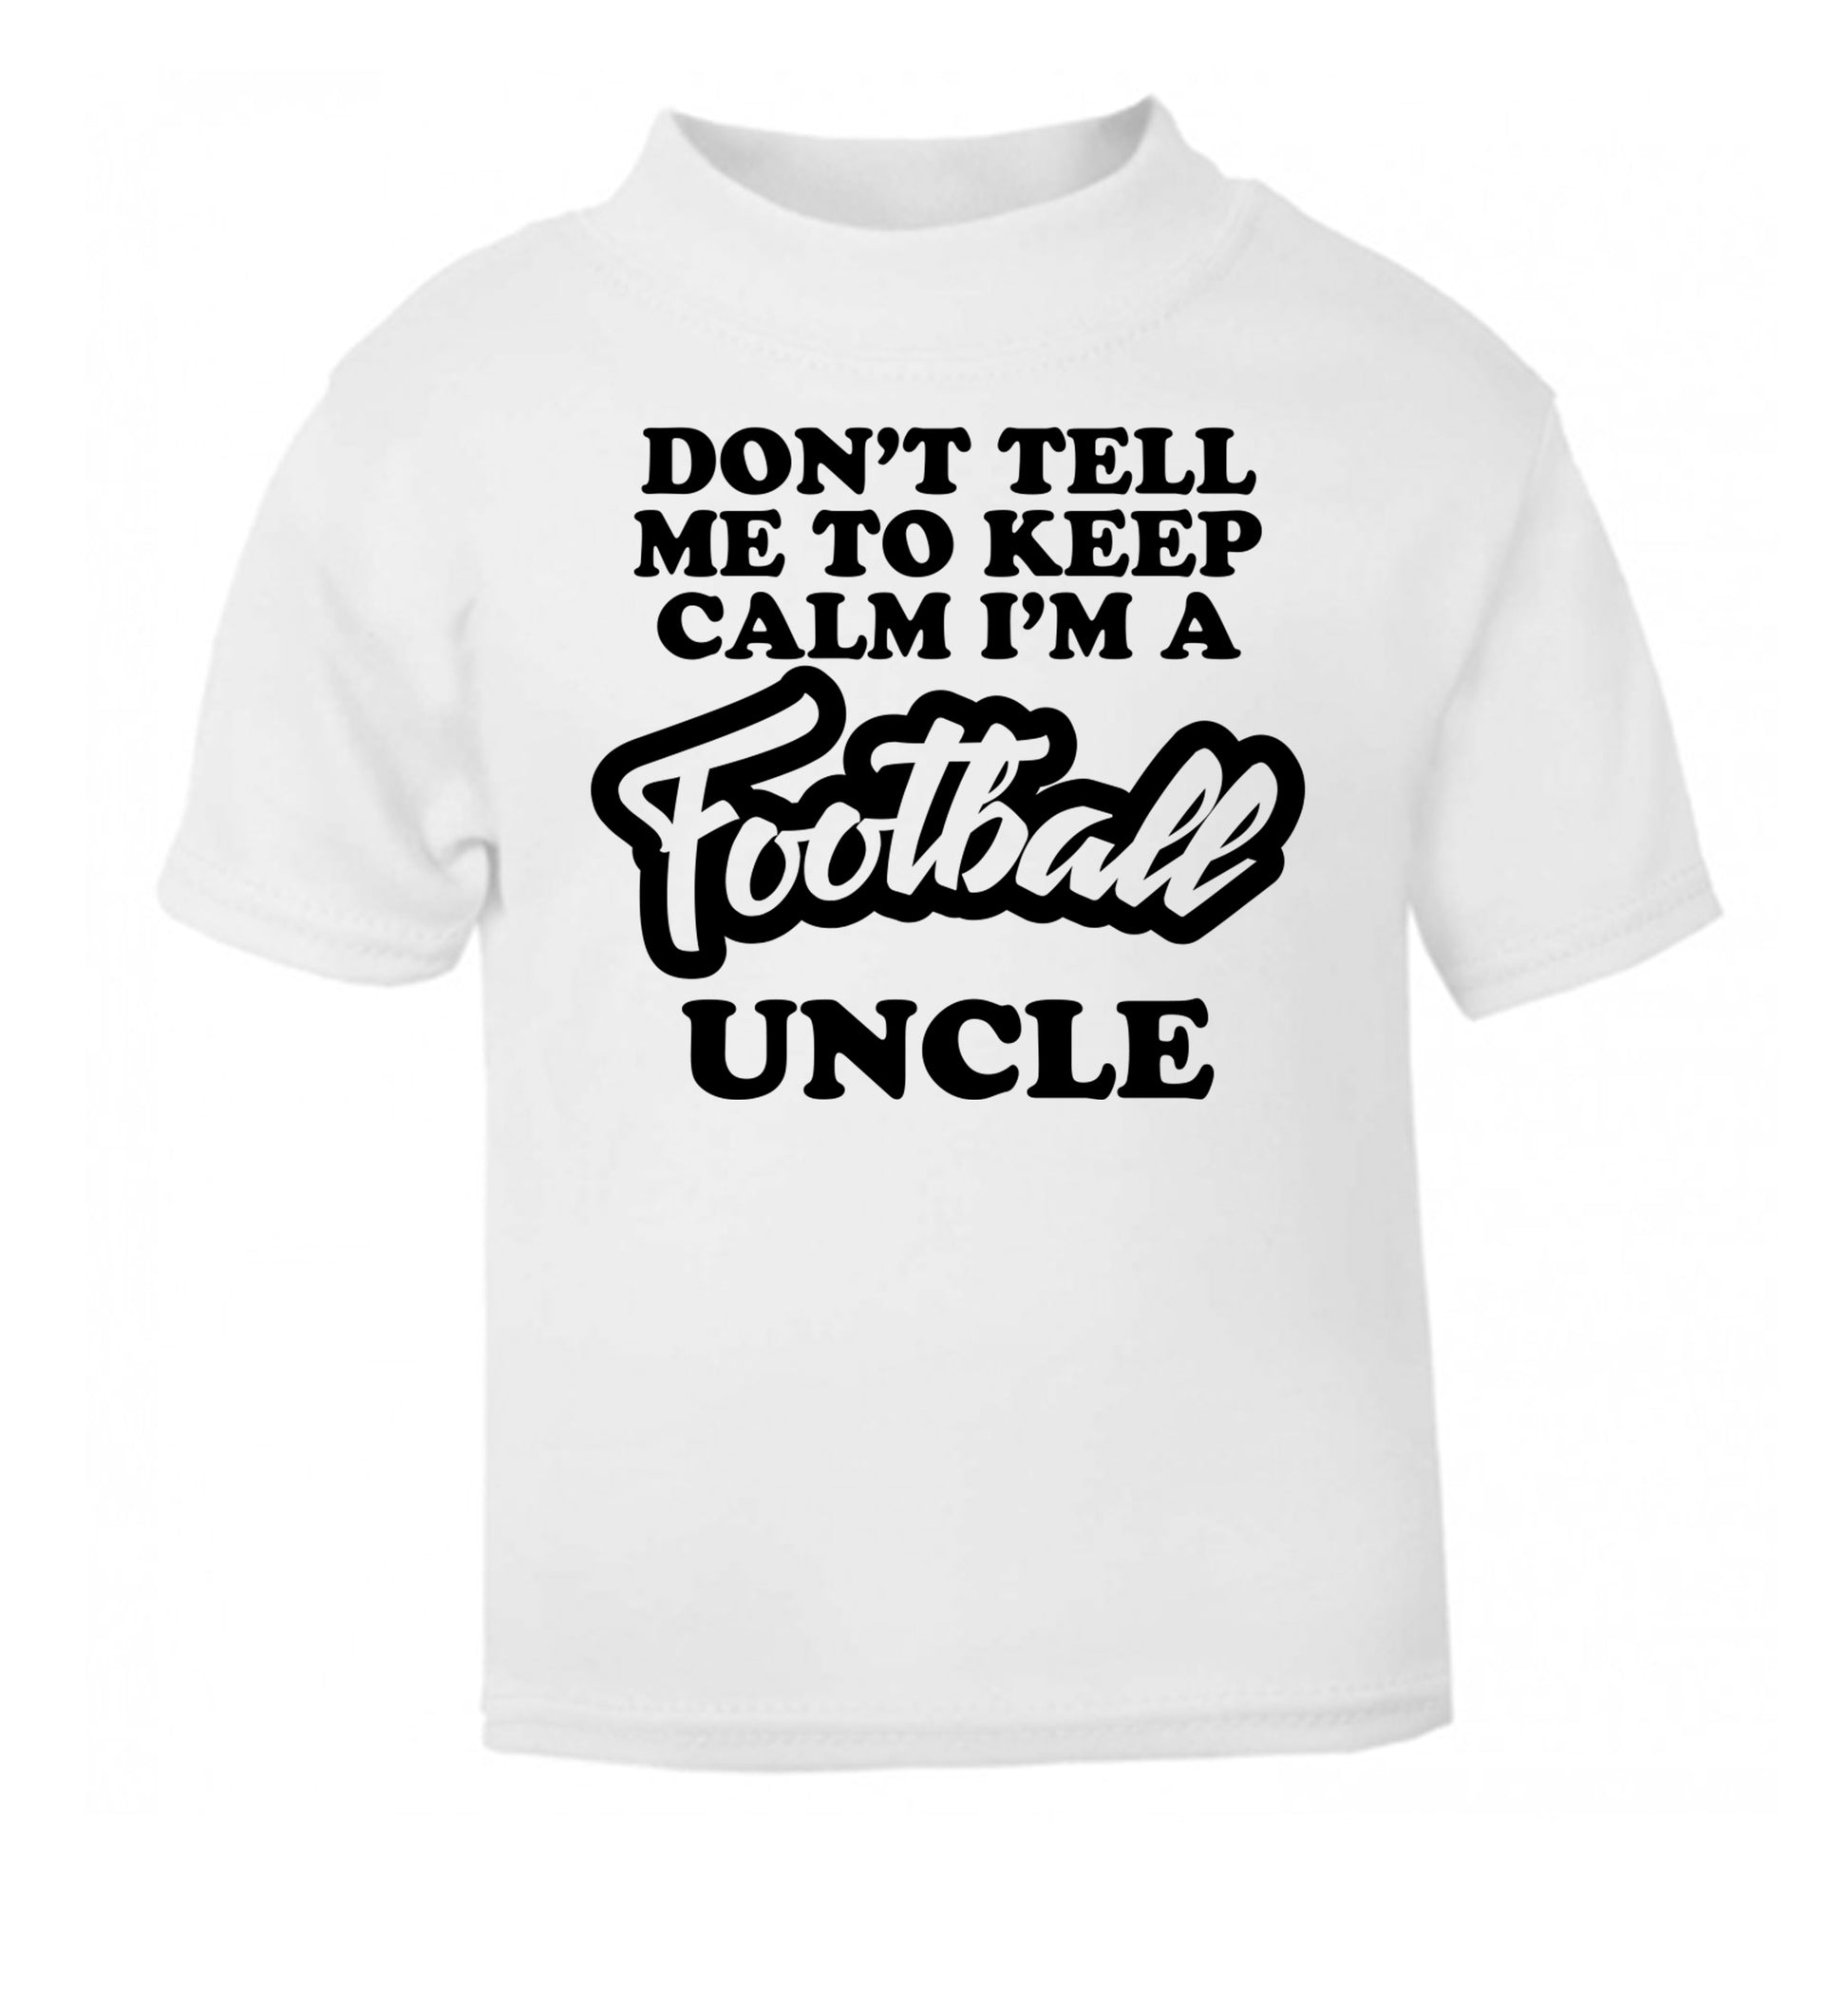 Don't tell me to keep calm I'm a football uncle white Baby Toddler Tshirt 2 Years